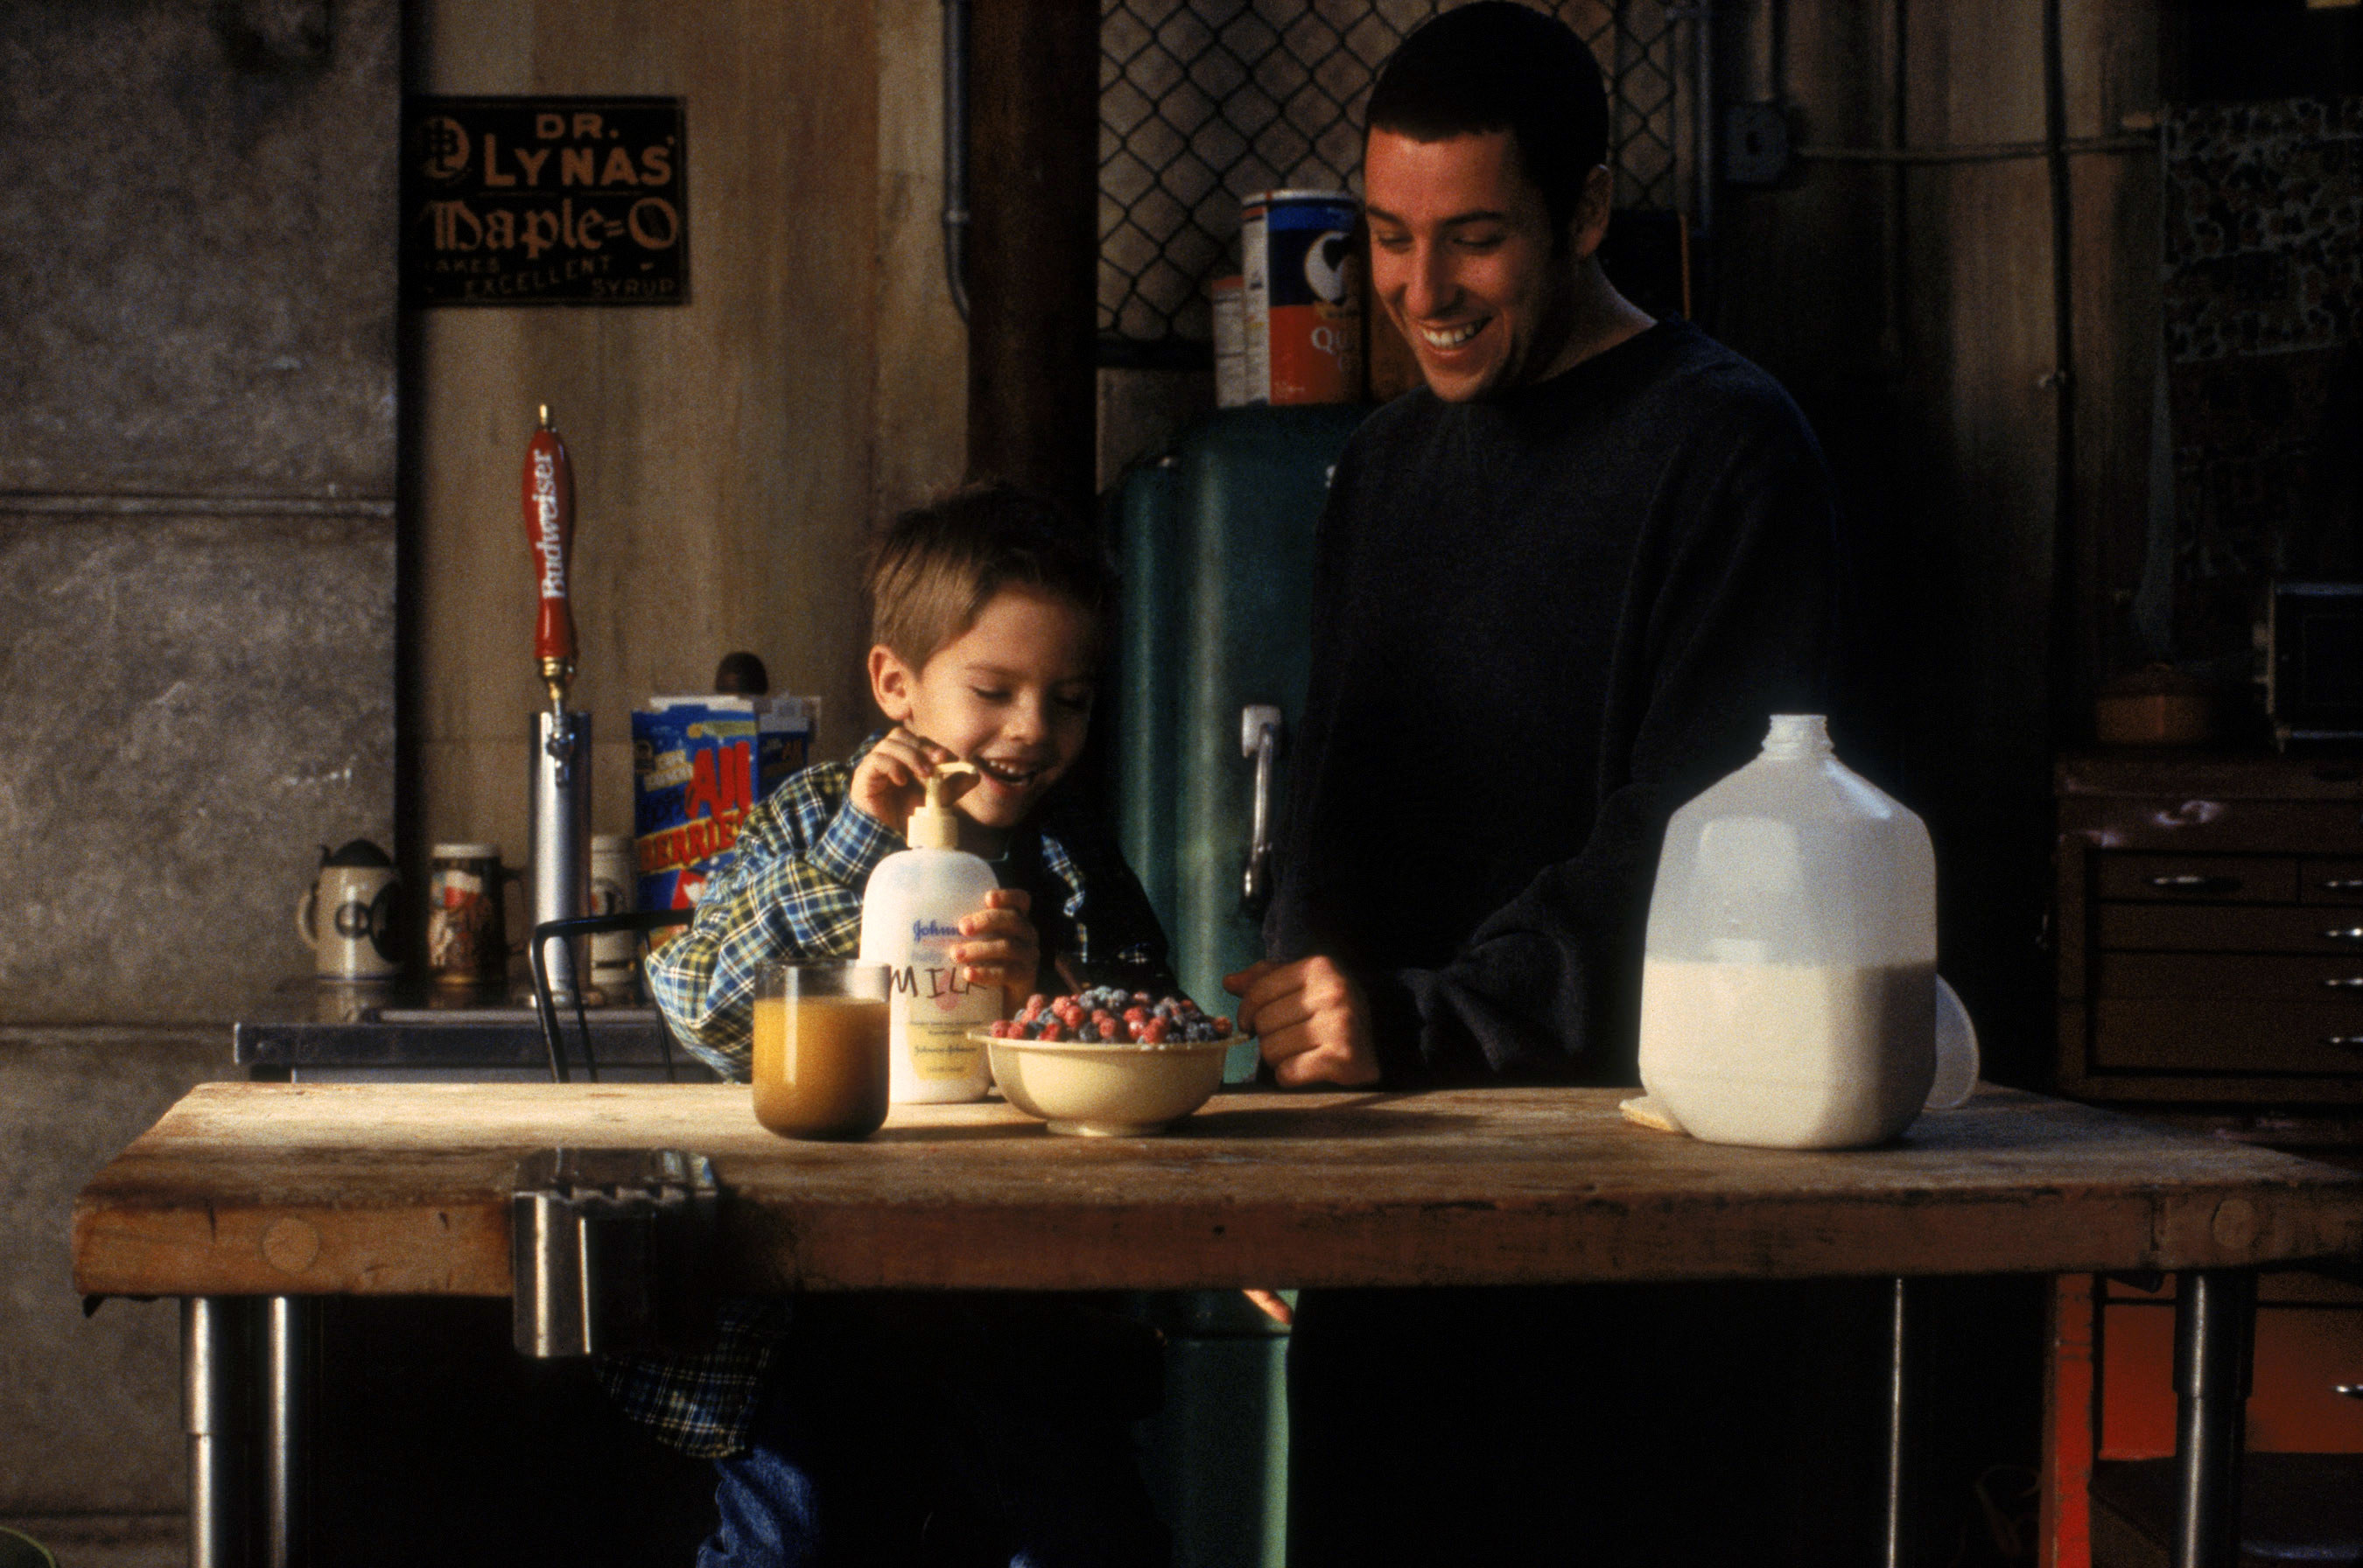 Adam Sandler looks on as a small child, played by twins Cole and Dylan Sprouse,  makes a bowl of cereal in the kitchen in a scene from the film Big Daddy